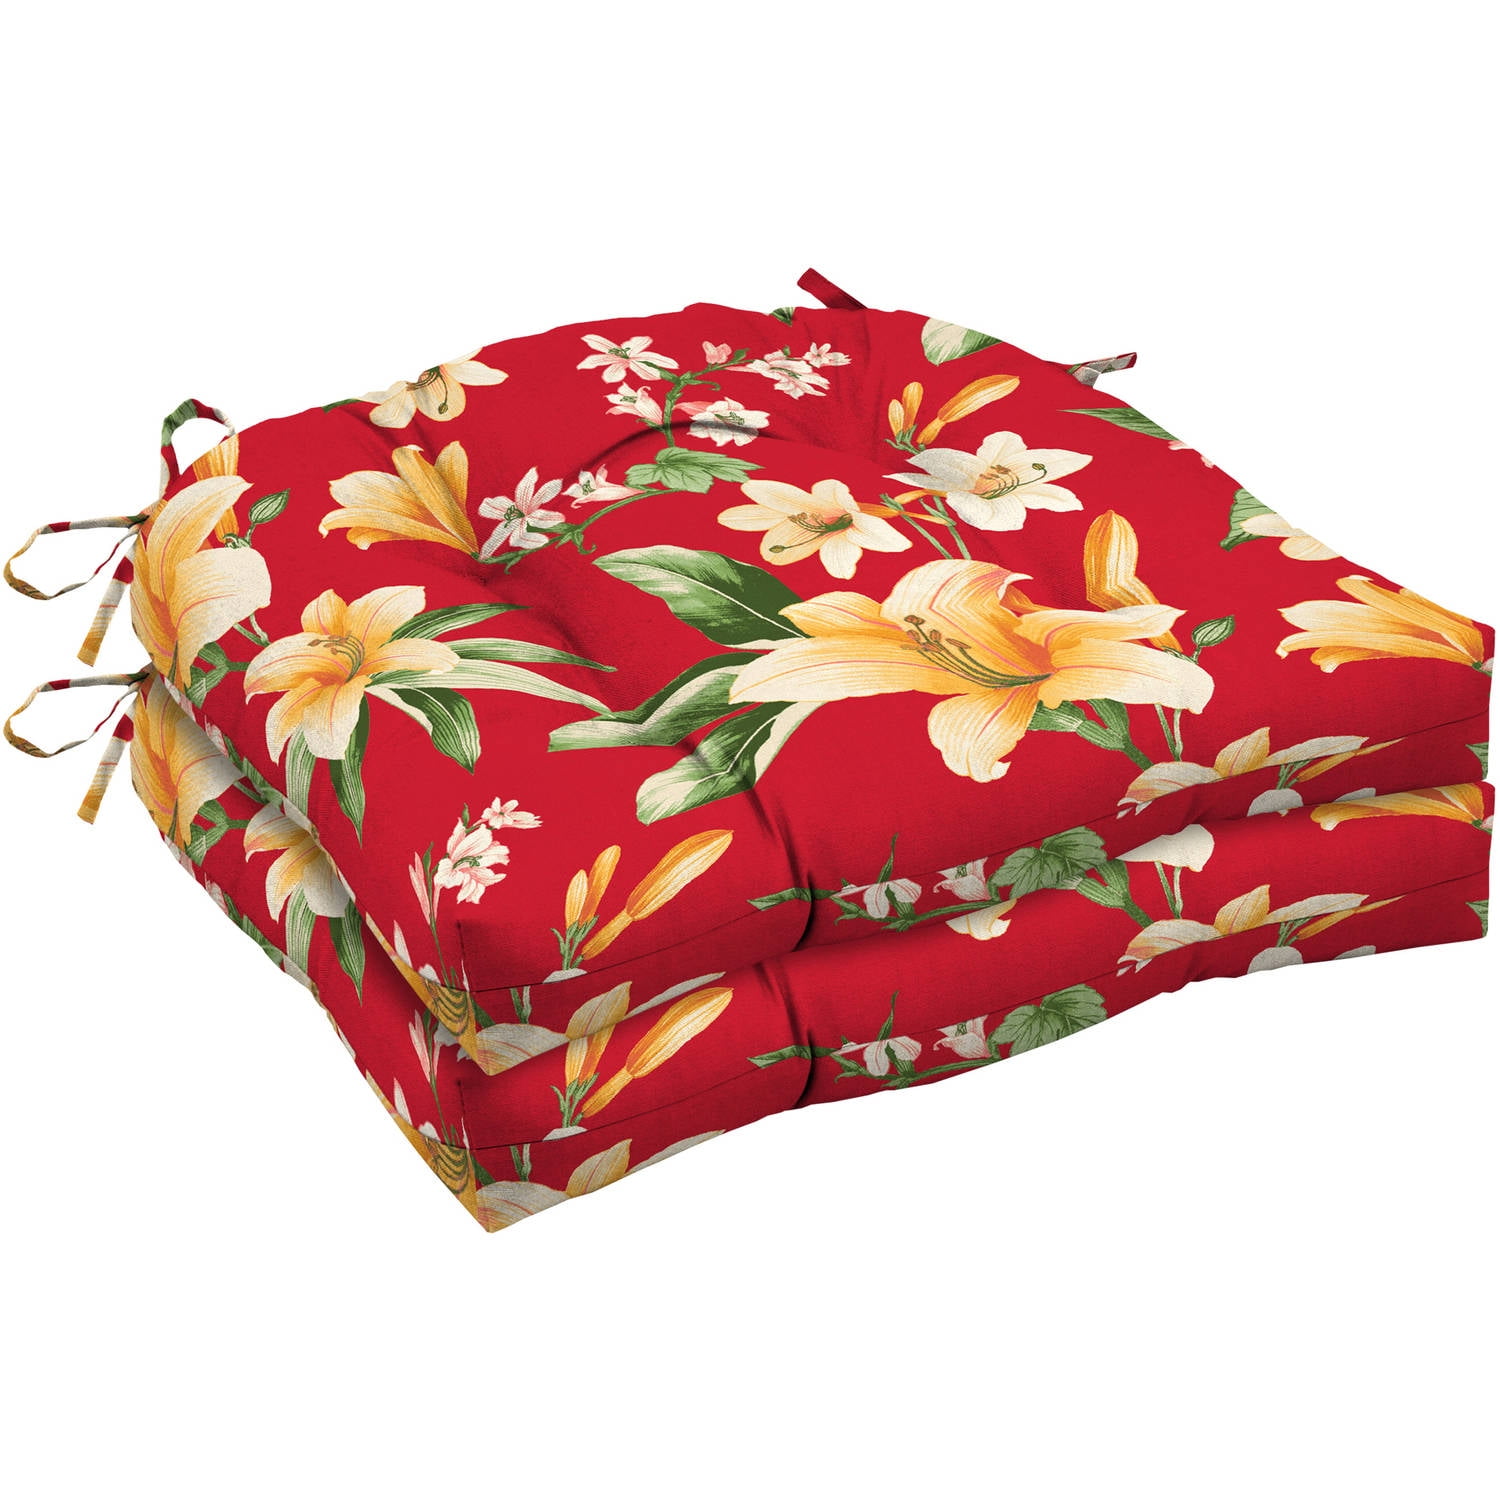 Mainstays Red Tropical 20"W x 18'D Outdoor Patio Wicker Seat Cushion